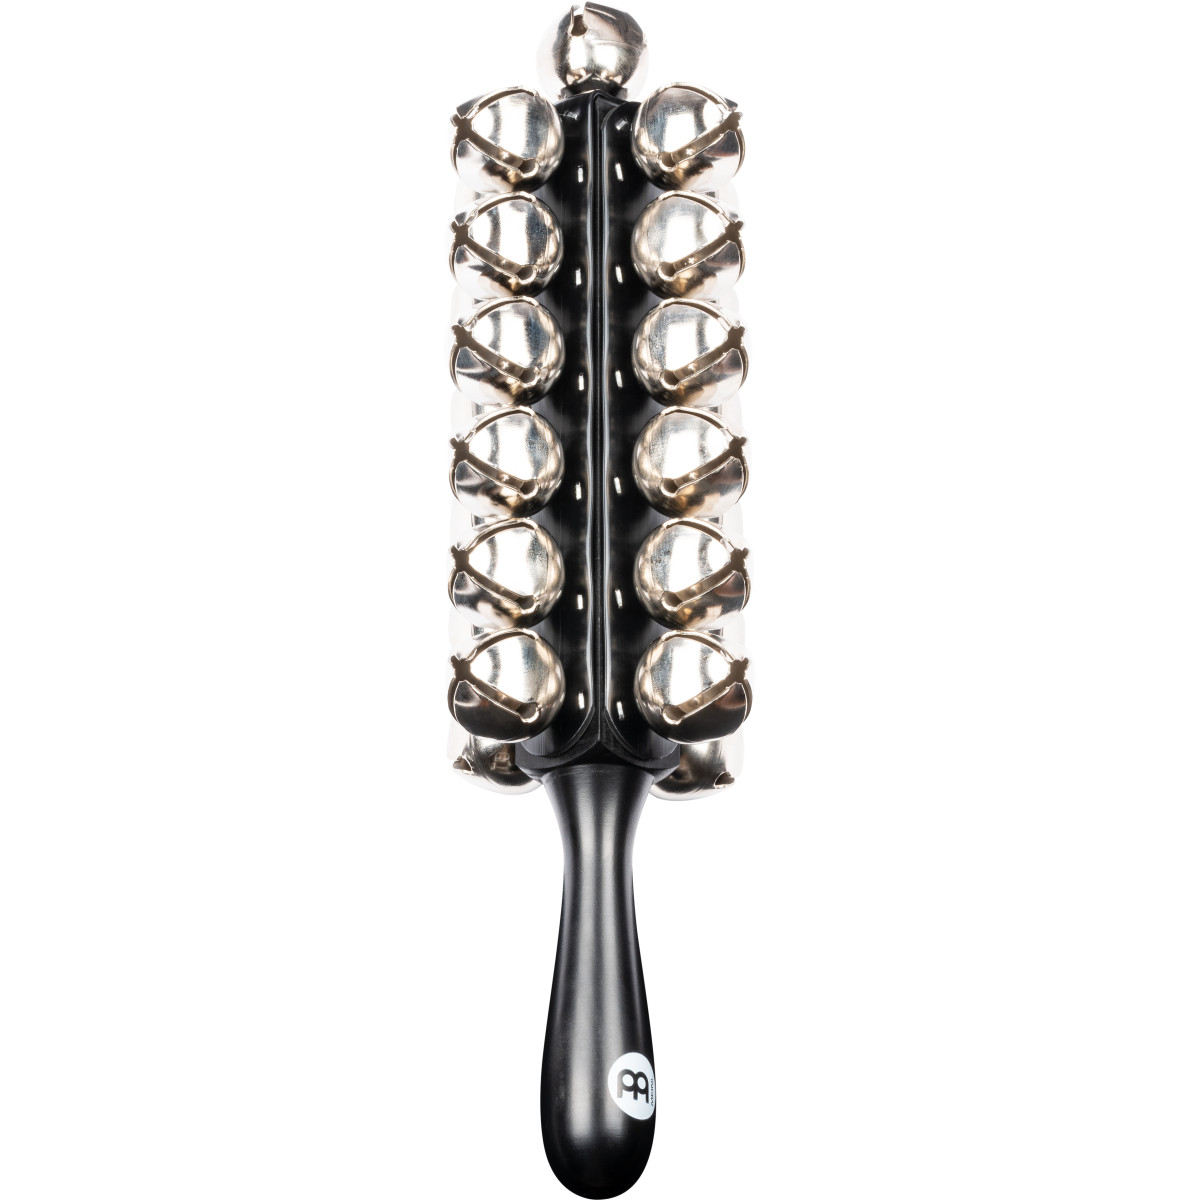  Meinl Percussion Double handle Sleigh Bells with